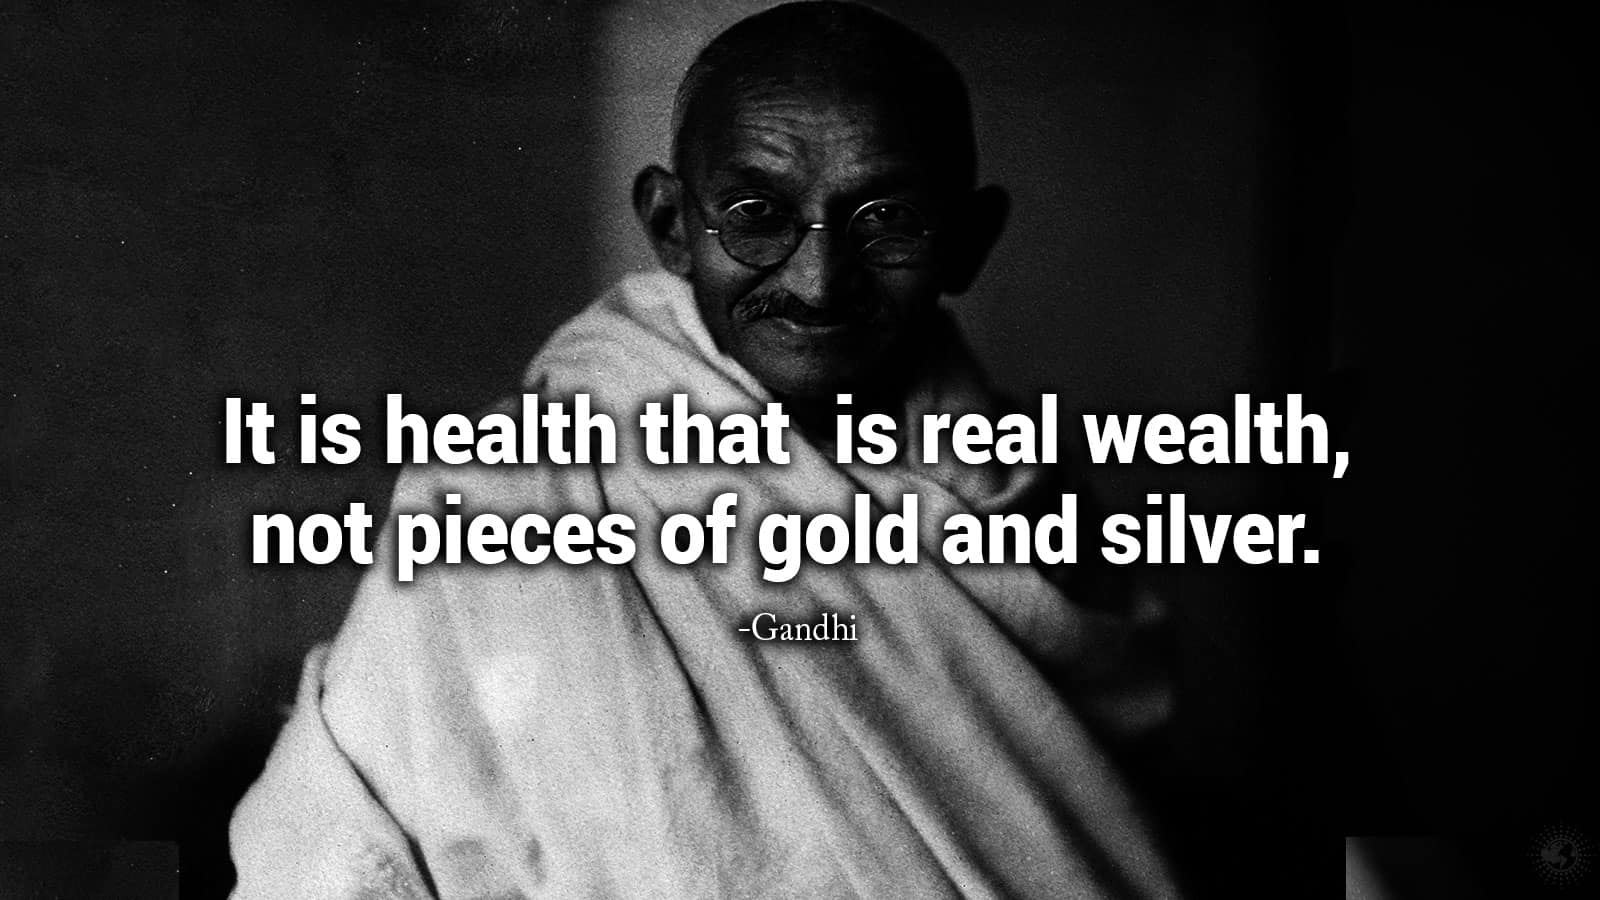 20 Inspirational Quotes About Life from Gandhi